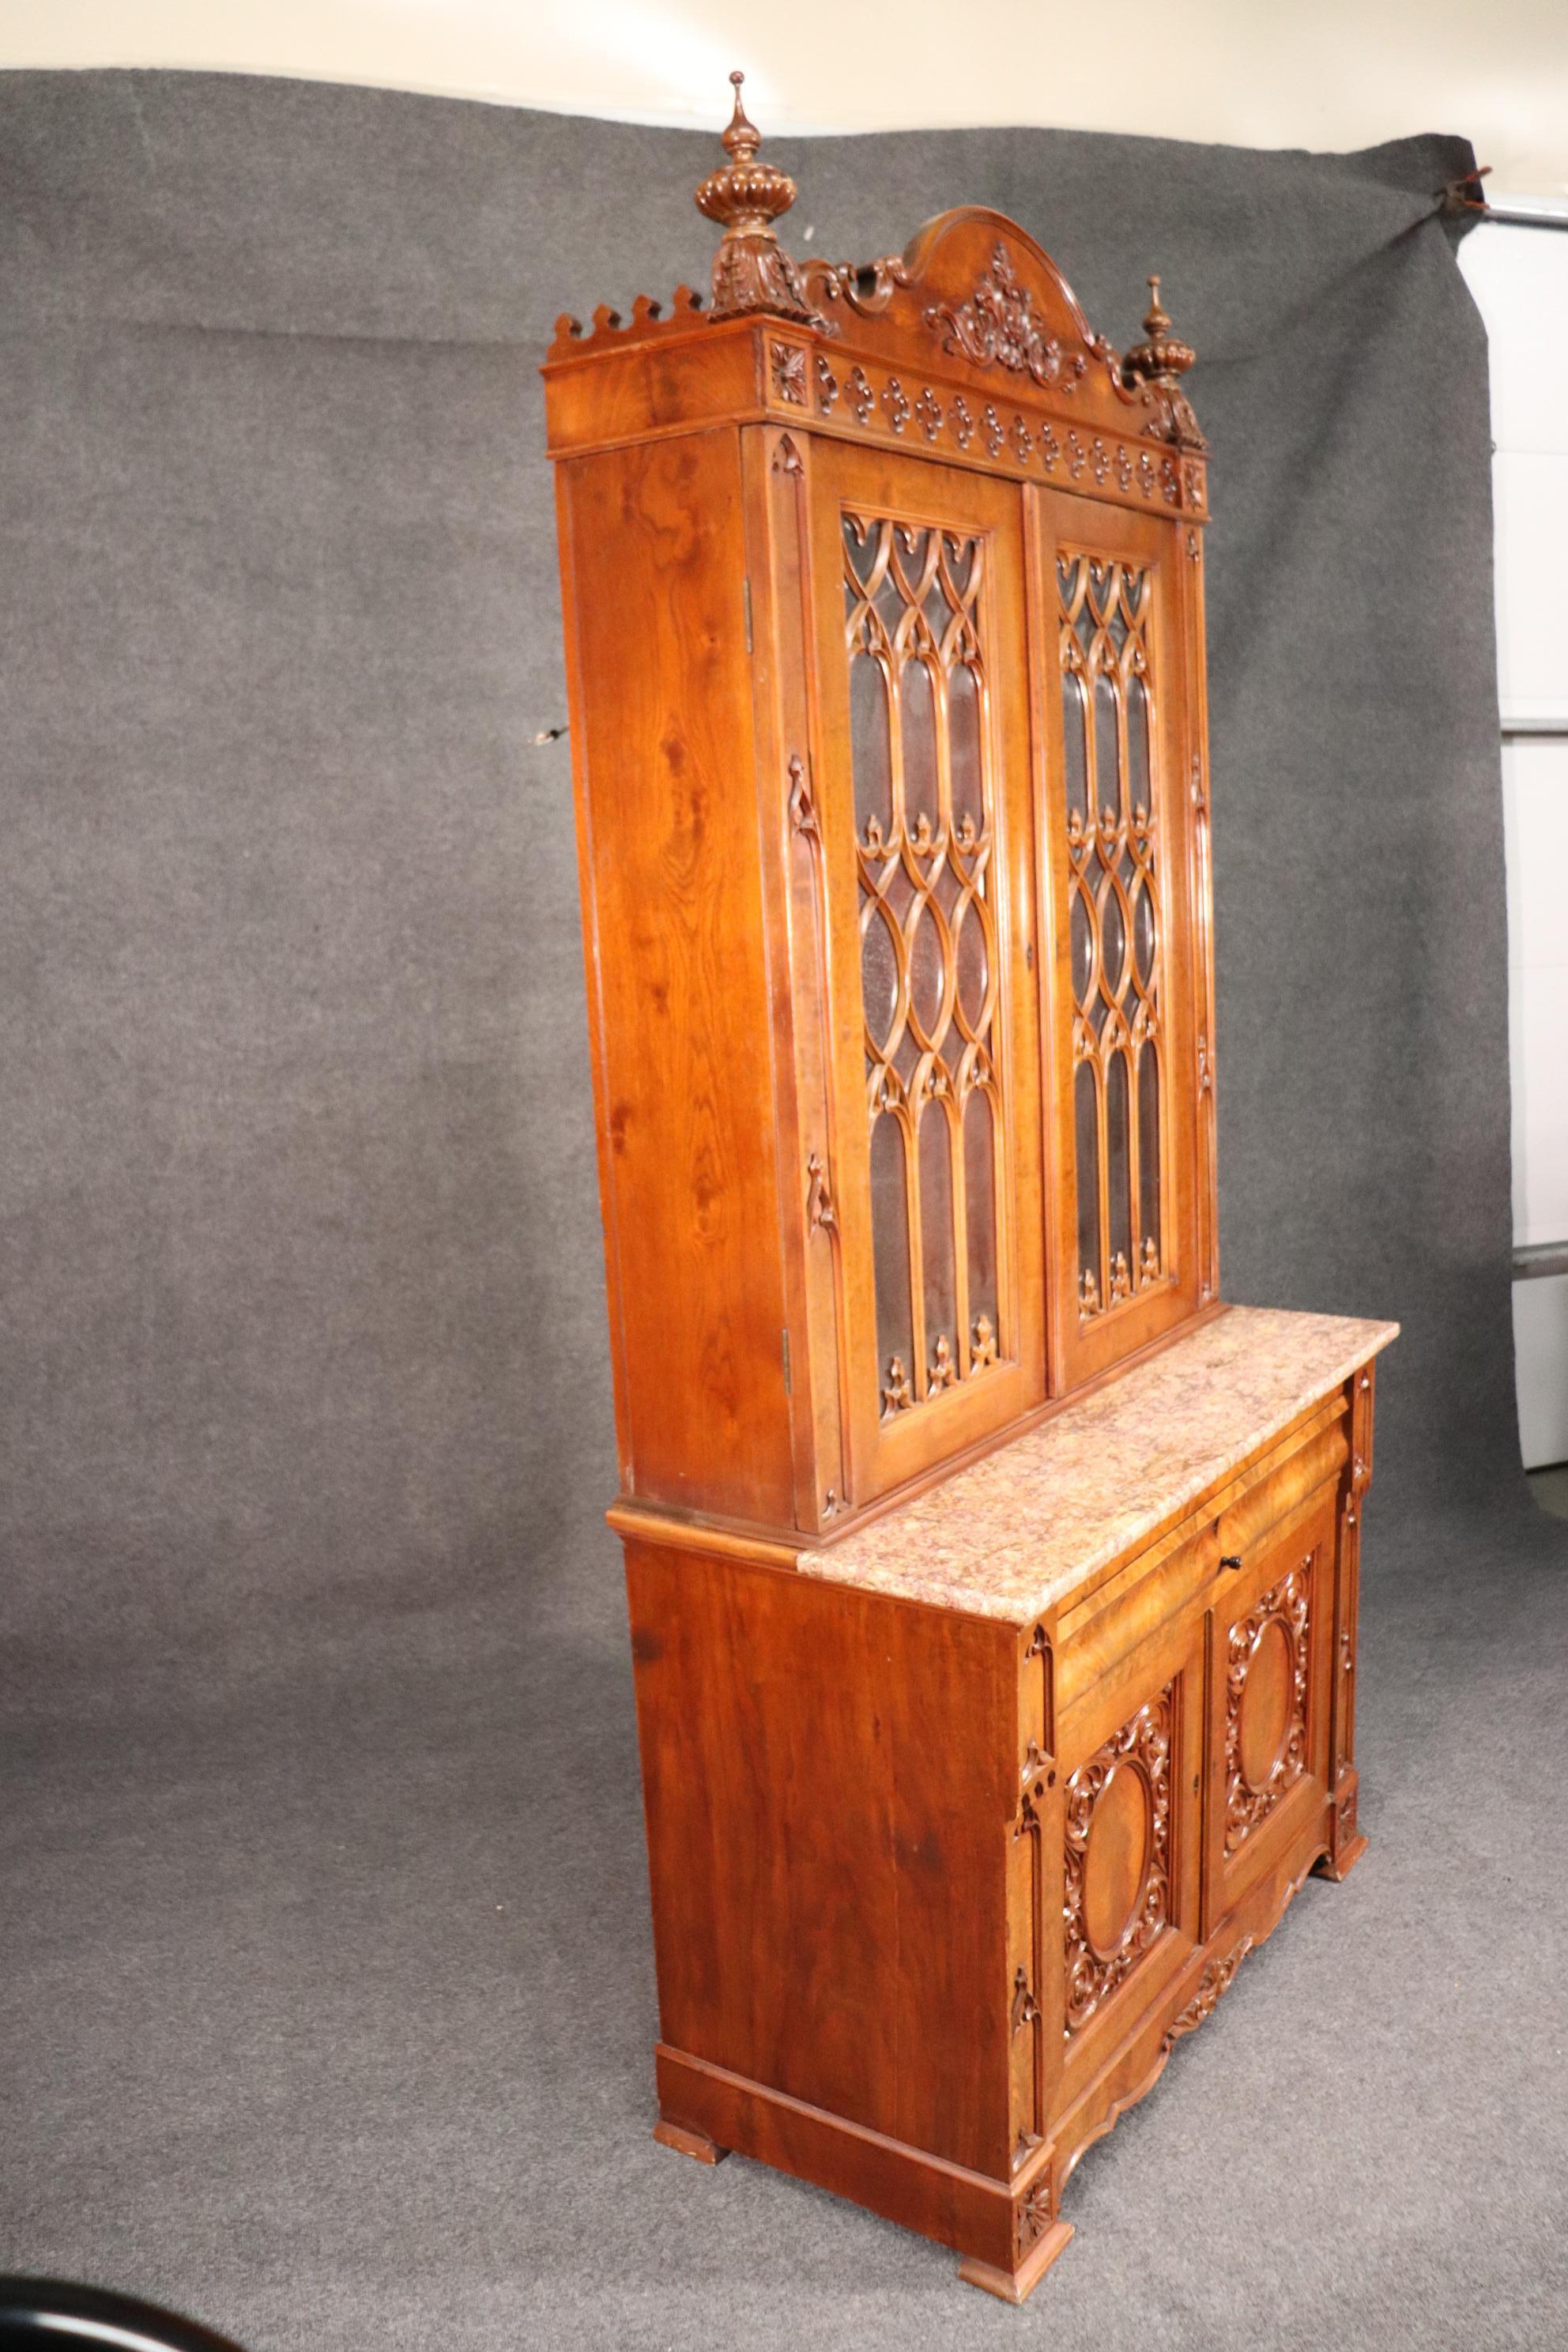 This is a very unique form of late Victorian secretary desk. Possibly made in New Orleans, because of its French marble and gothic styled tracery doors, this piece is in good condition and looks as if it was restored at some point. The piece